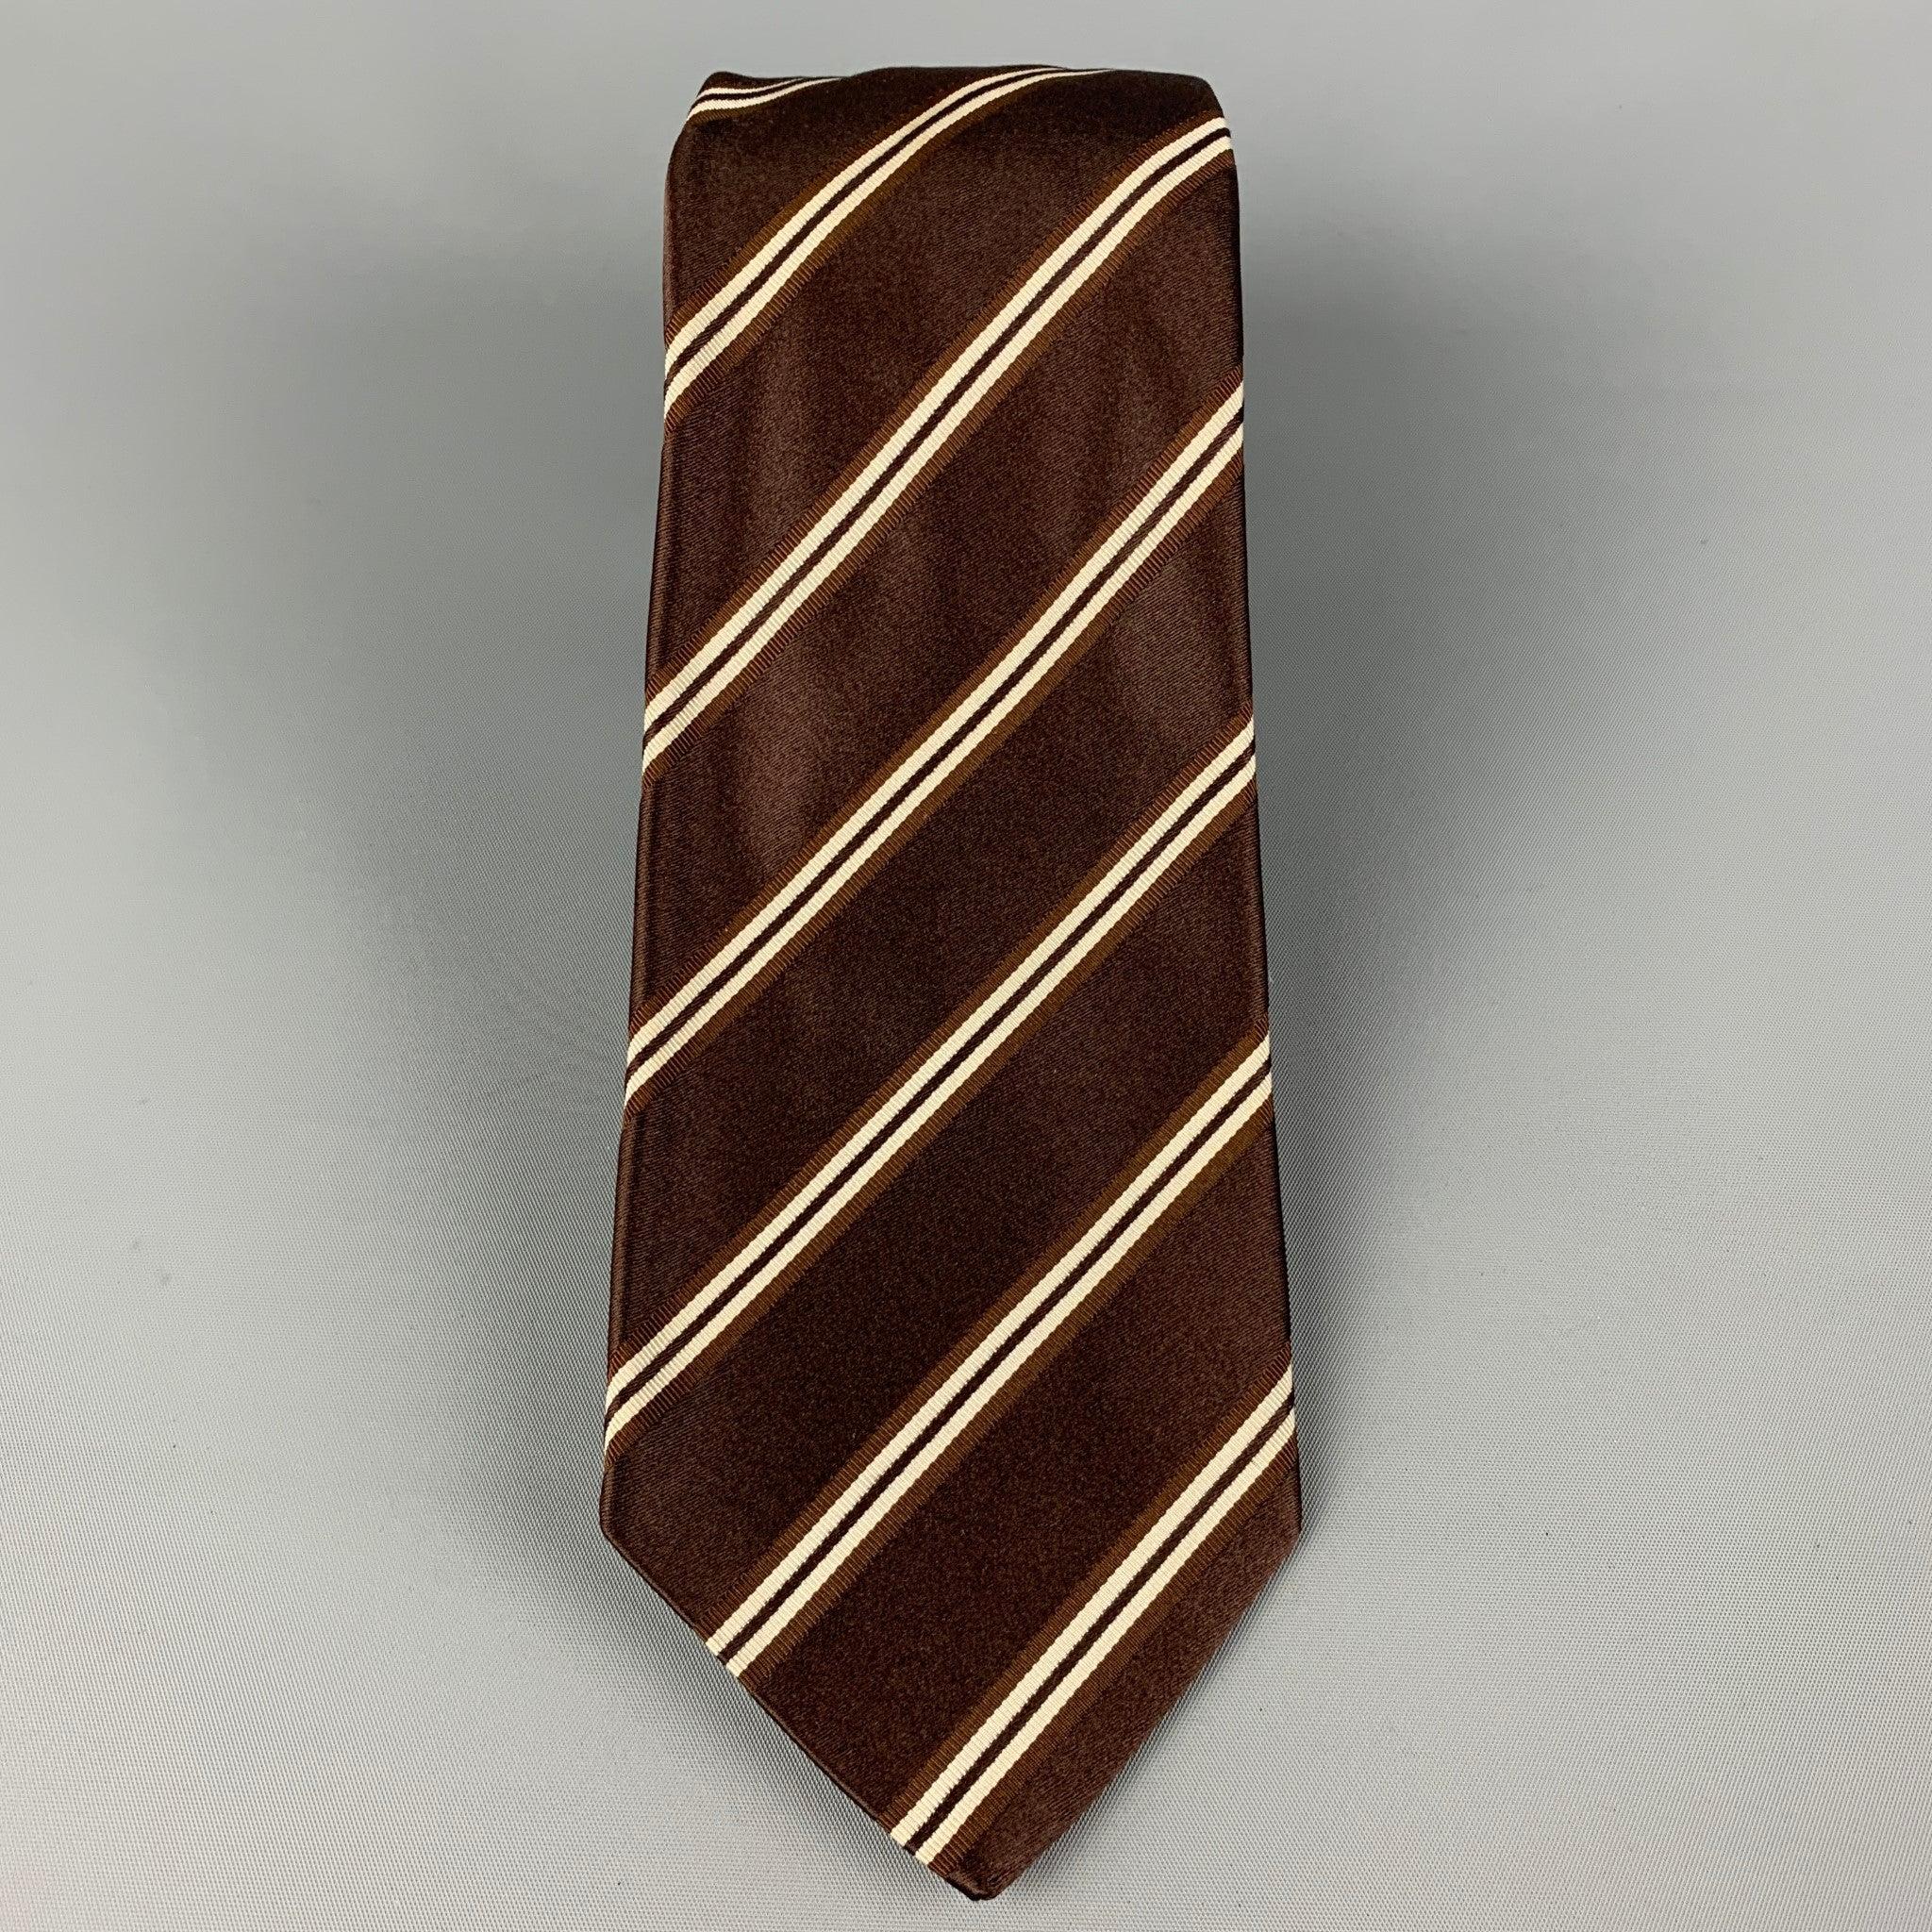 KITON necktie comes in a brown & white silk with a all over diagonal print. Made in Italy . Very Good Pre-Owned Condition.Width: 3.75 inches  Length: 60 inches 

  
  
 
Reference: 120363
Category: Tie
More Details
    
Brand:  KITON
Gender: 